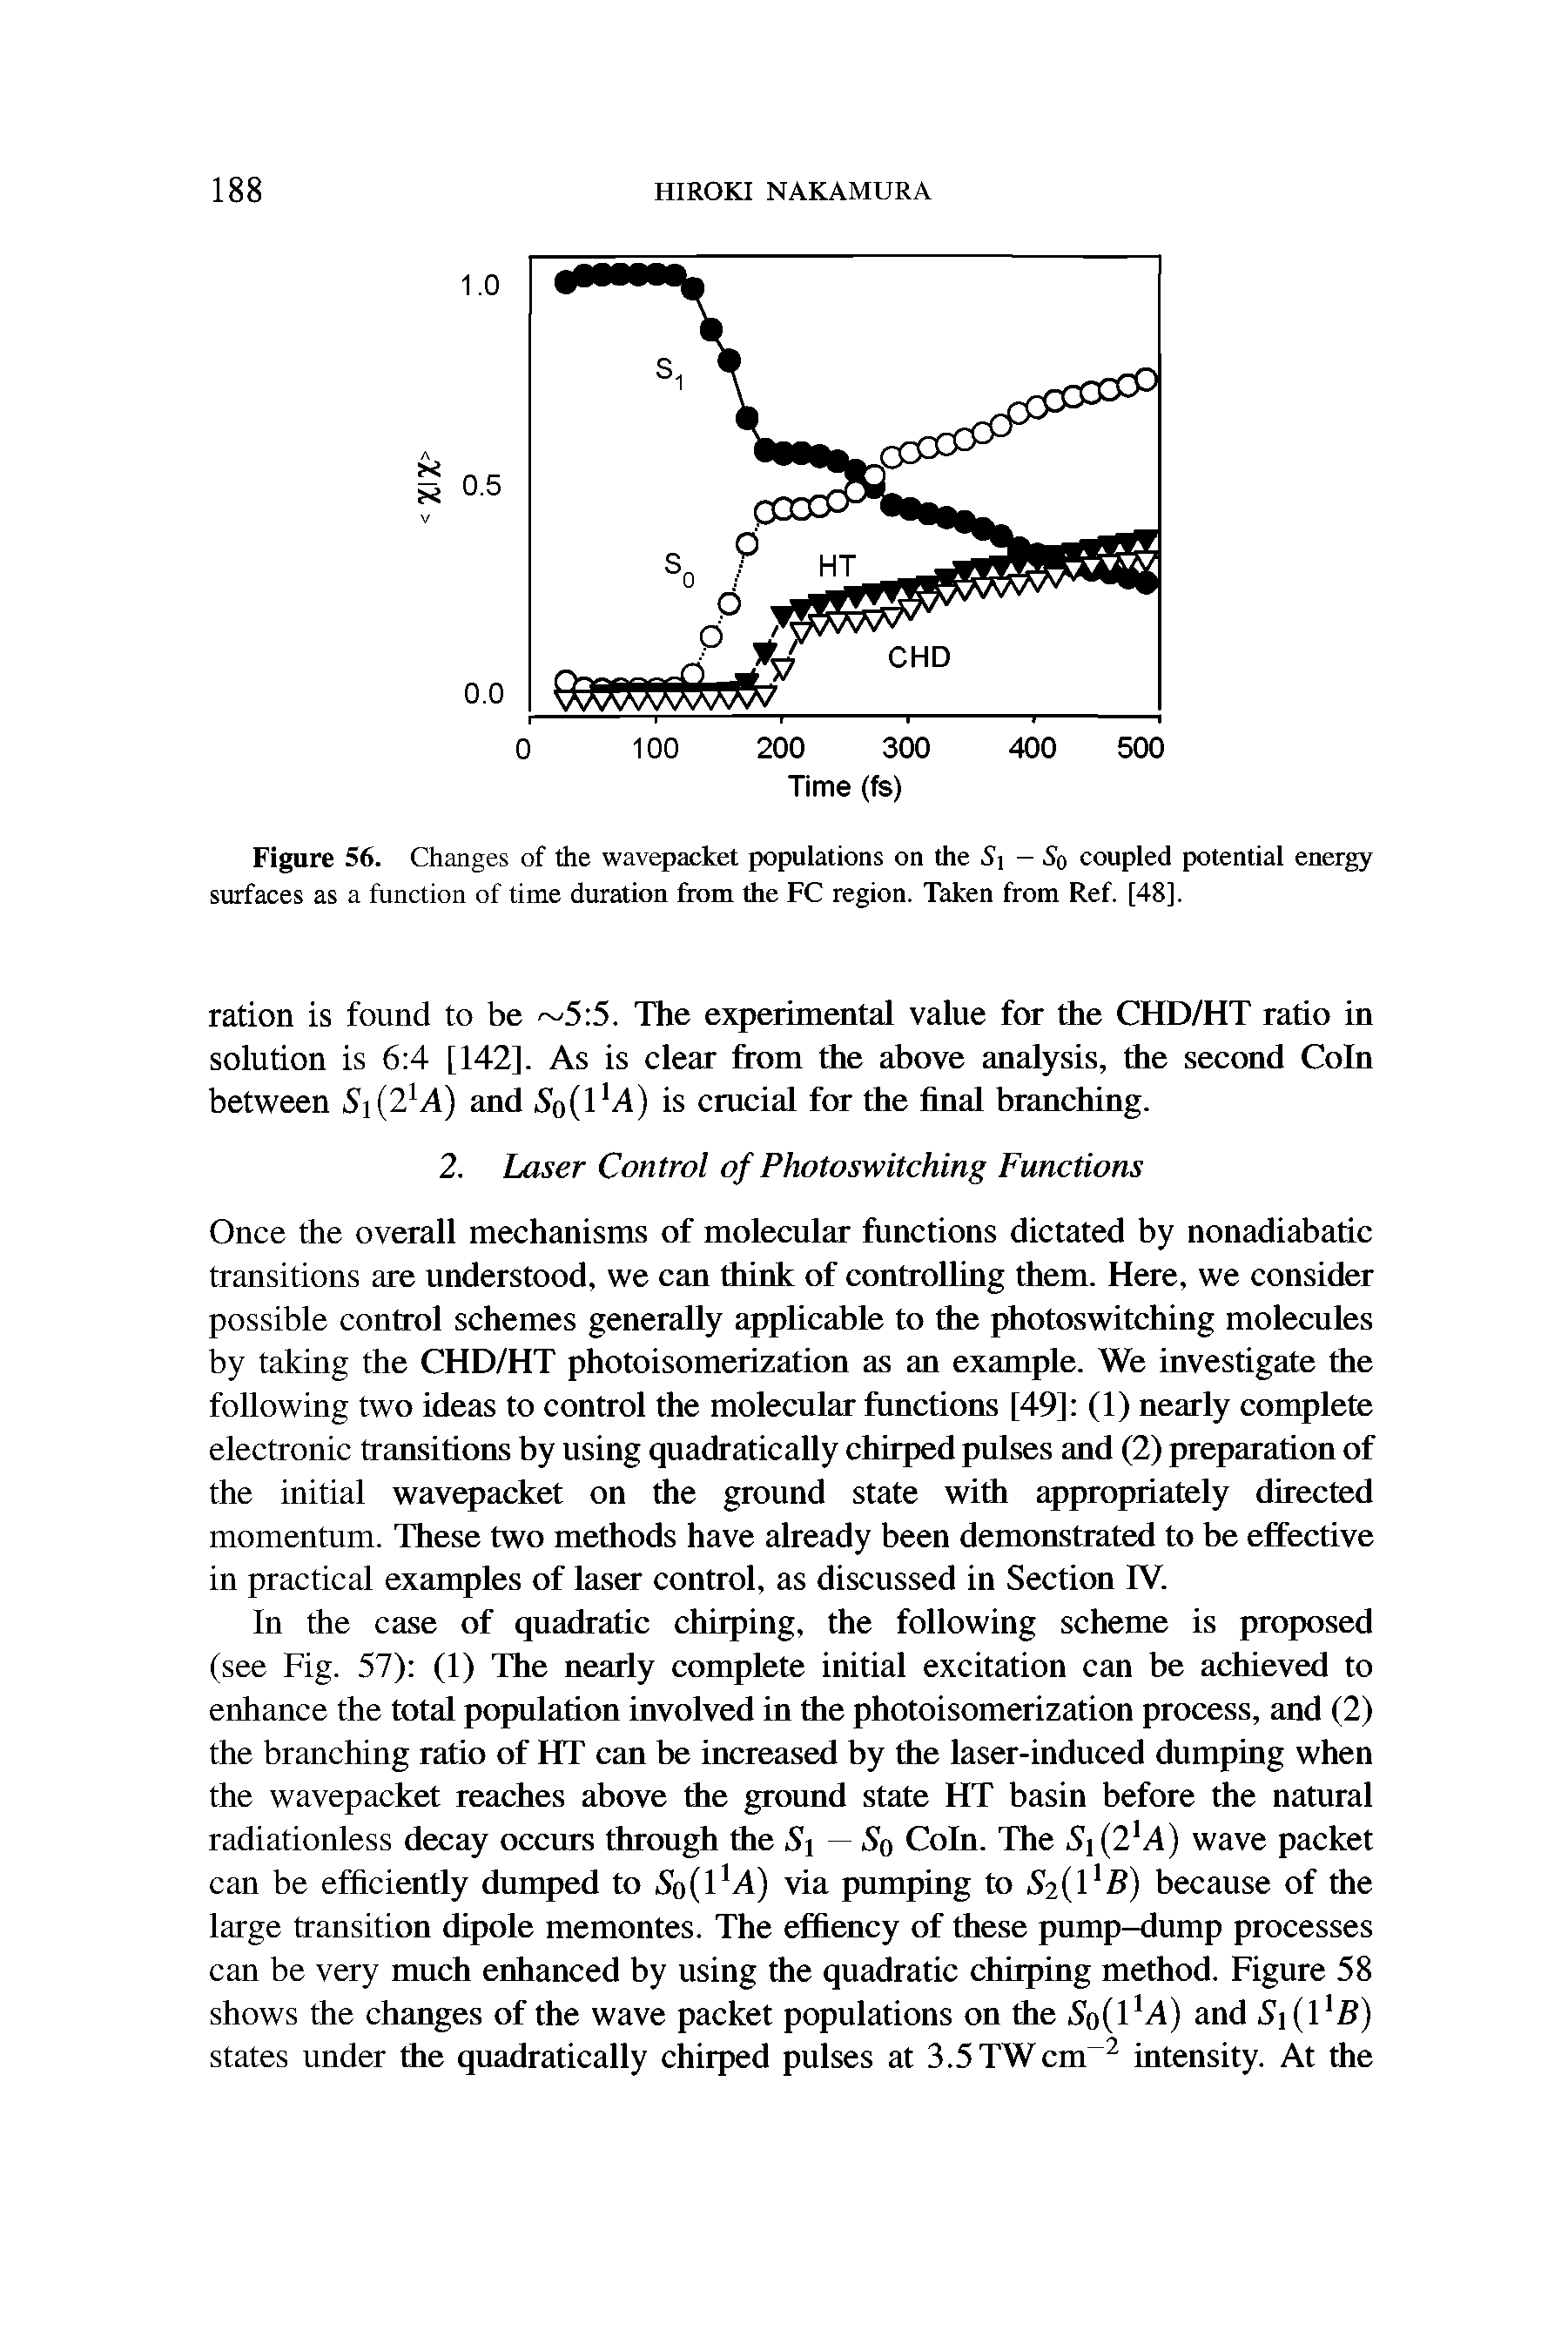 Figure 56. Changes of the wavepacket populations on the Si - So coupled potential energy surfaces as a function of time duration from the FC region. Taken from Ref. [48].